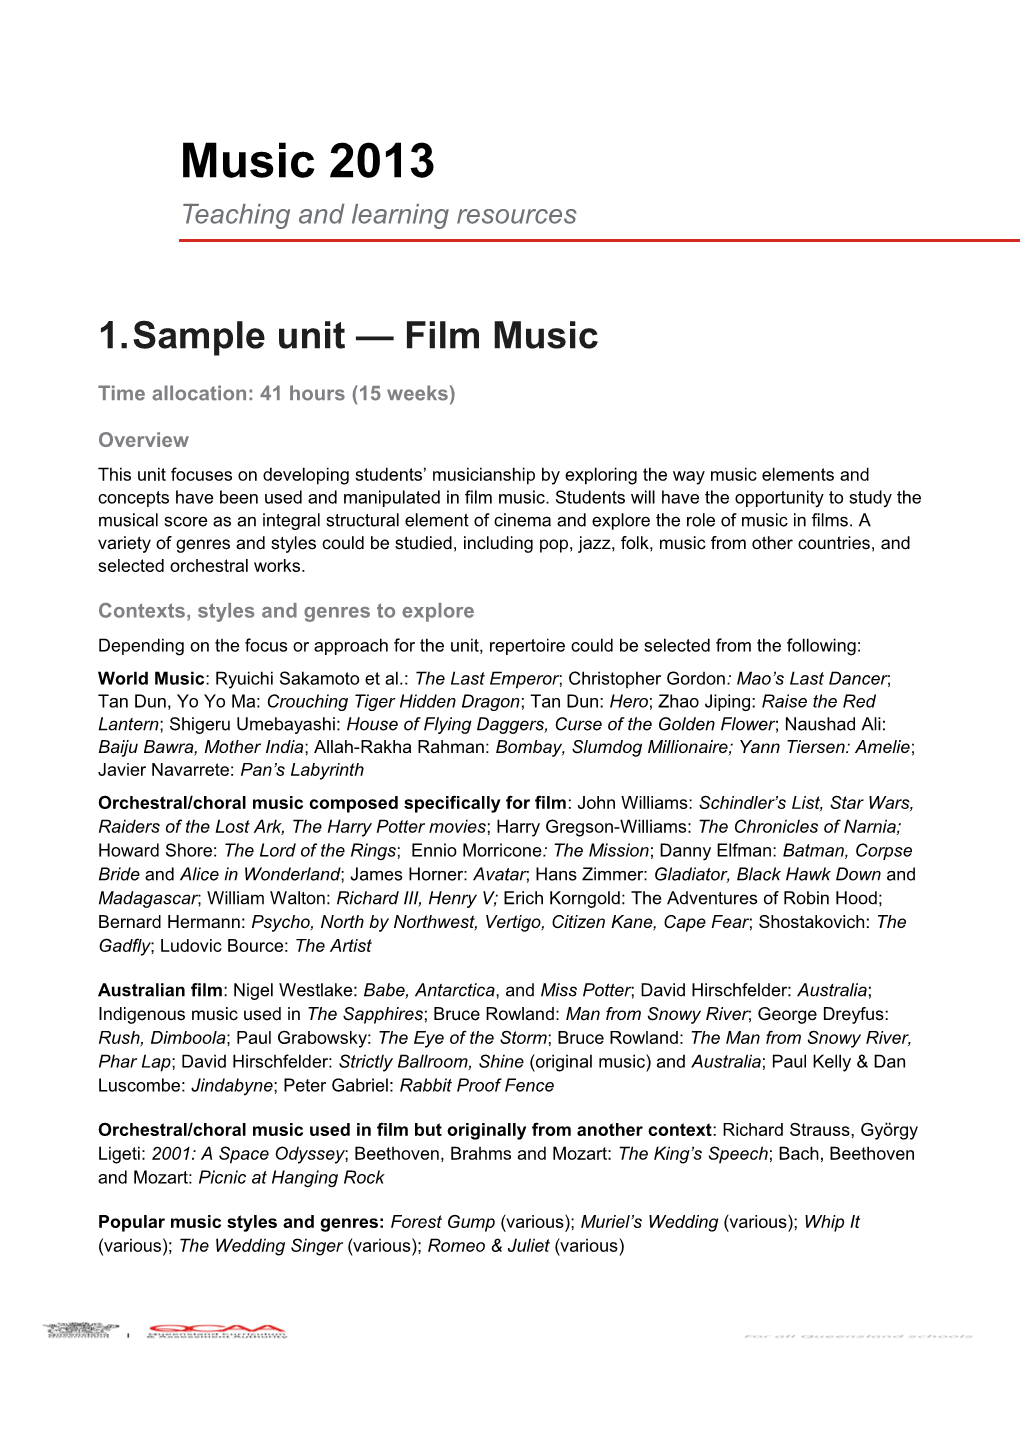 Music (2013) Teaching and Learning Resources: Sample Unit - Film Music